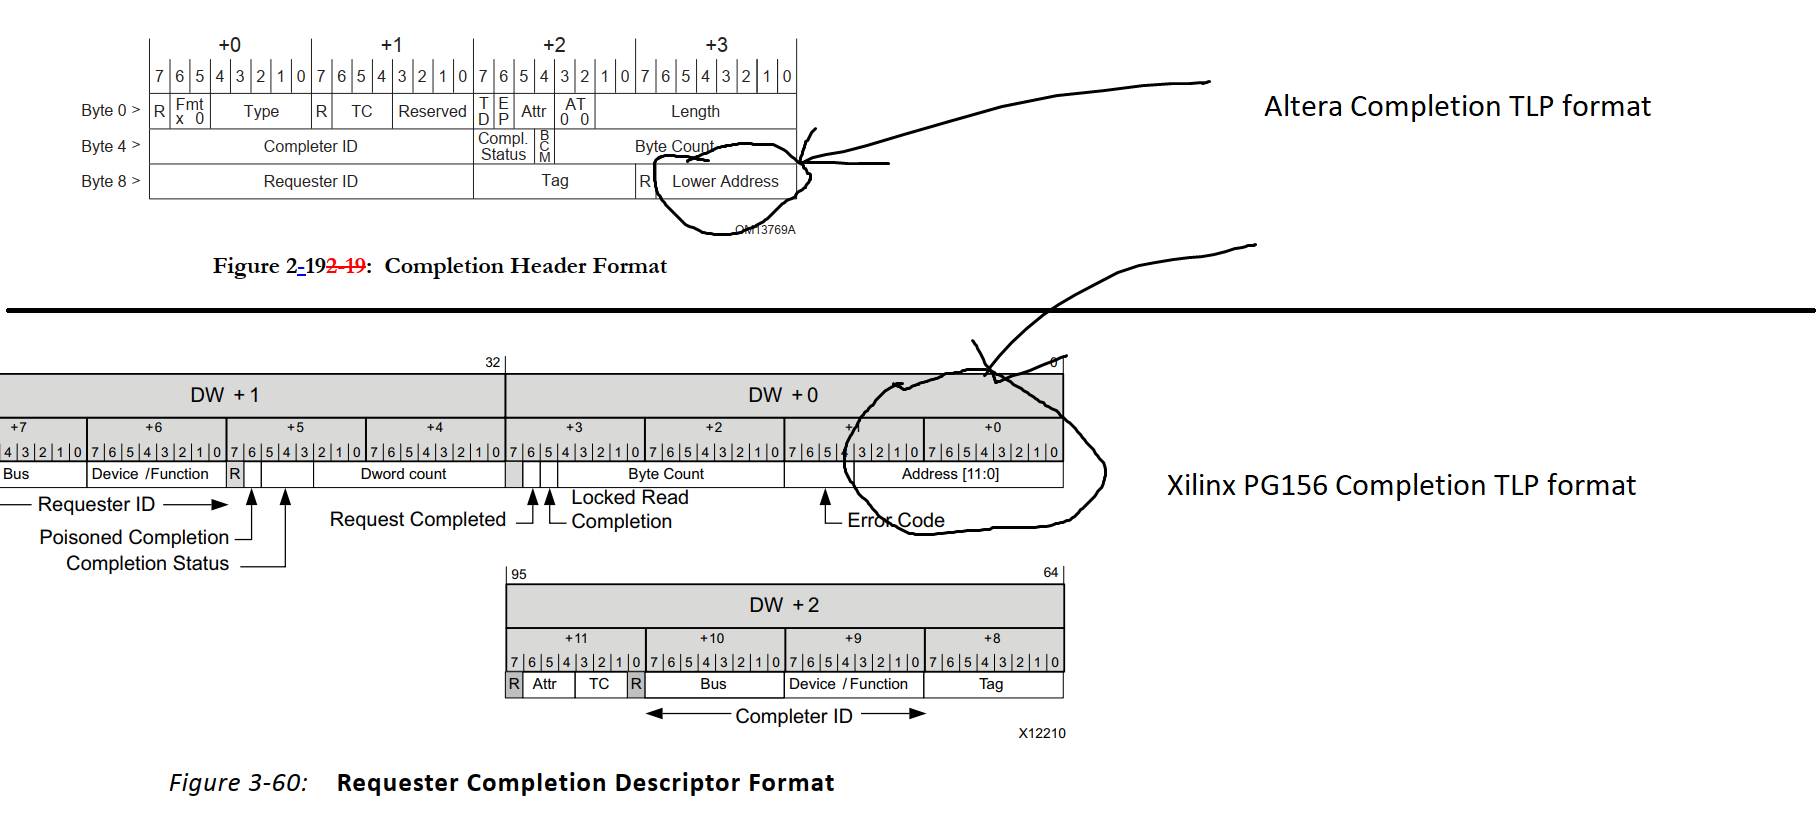 Understanding difference in Altera Avalon streaming & Xilinx PG156